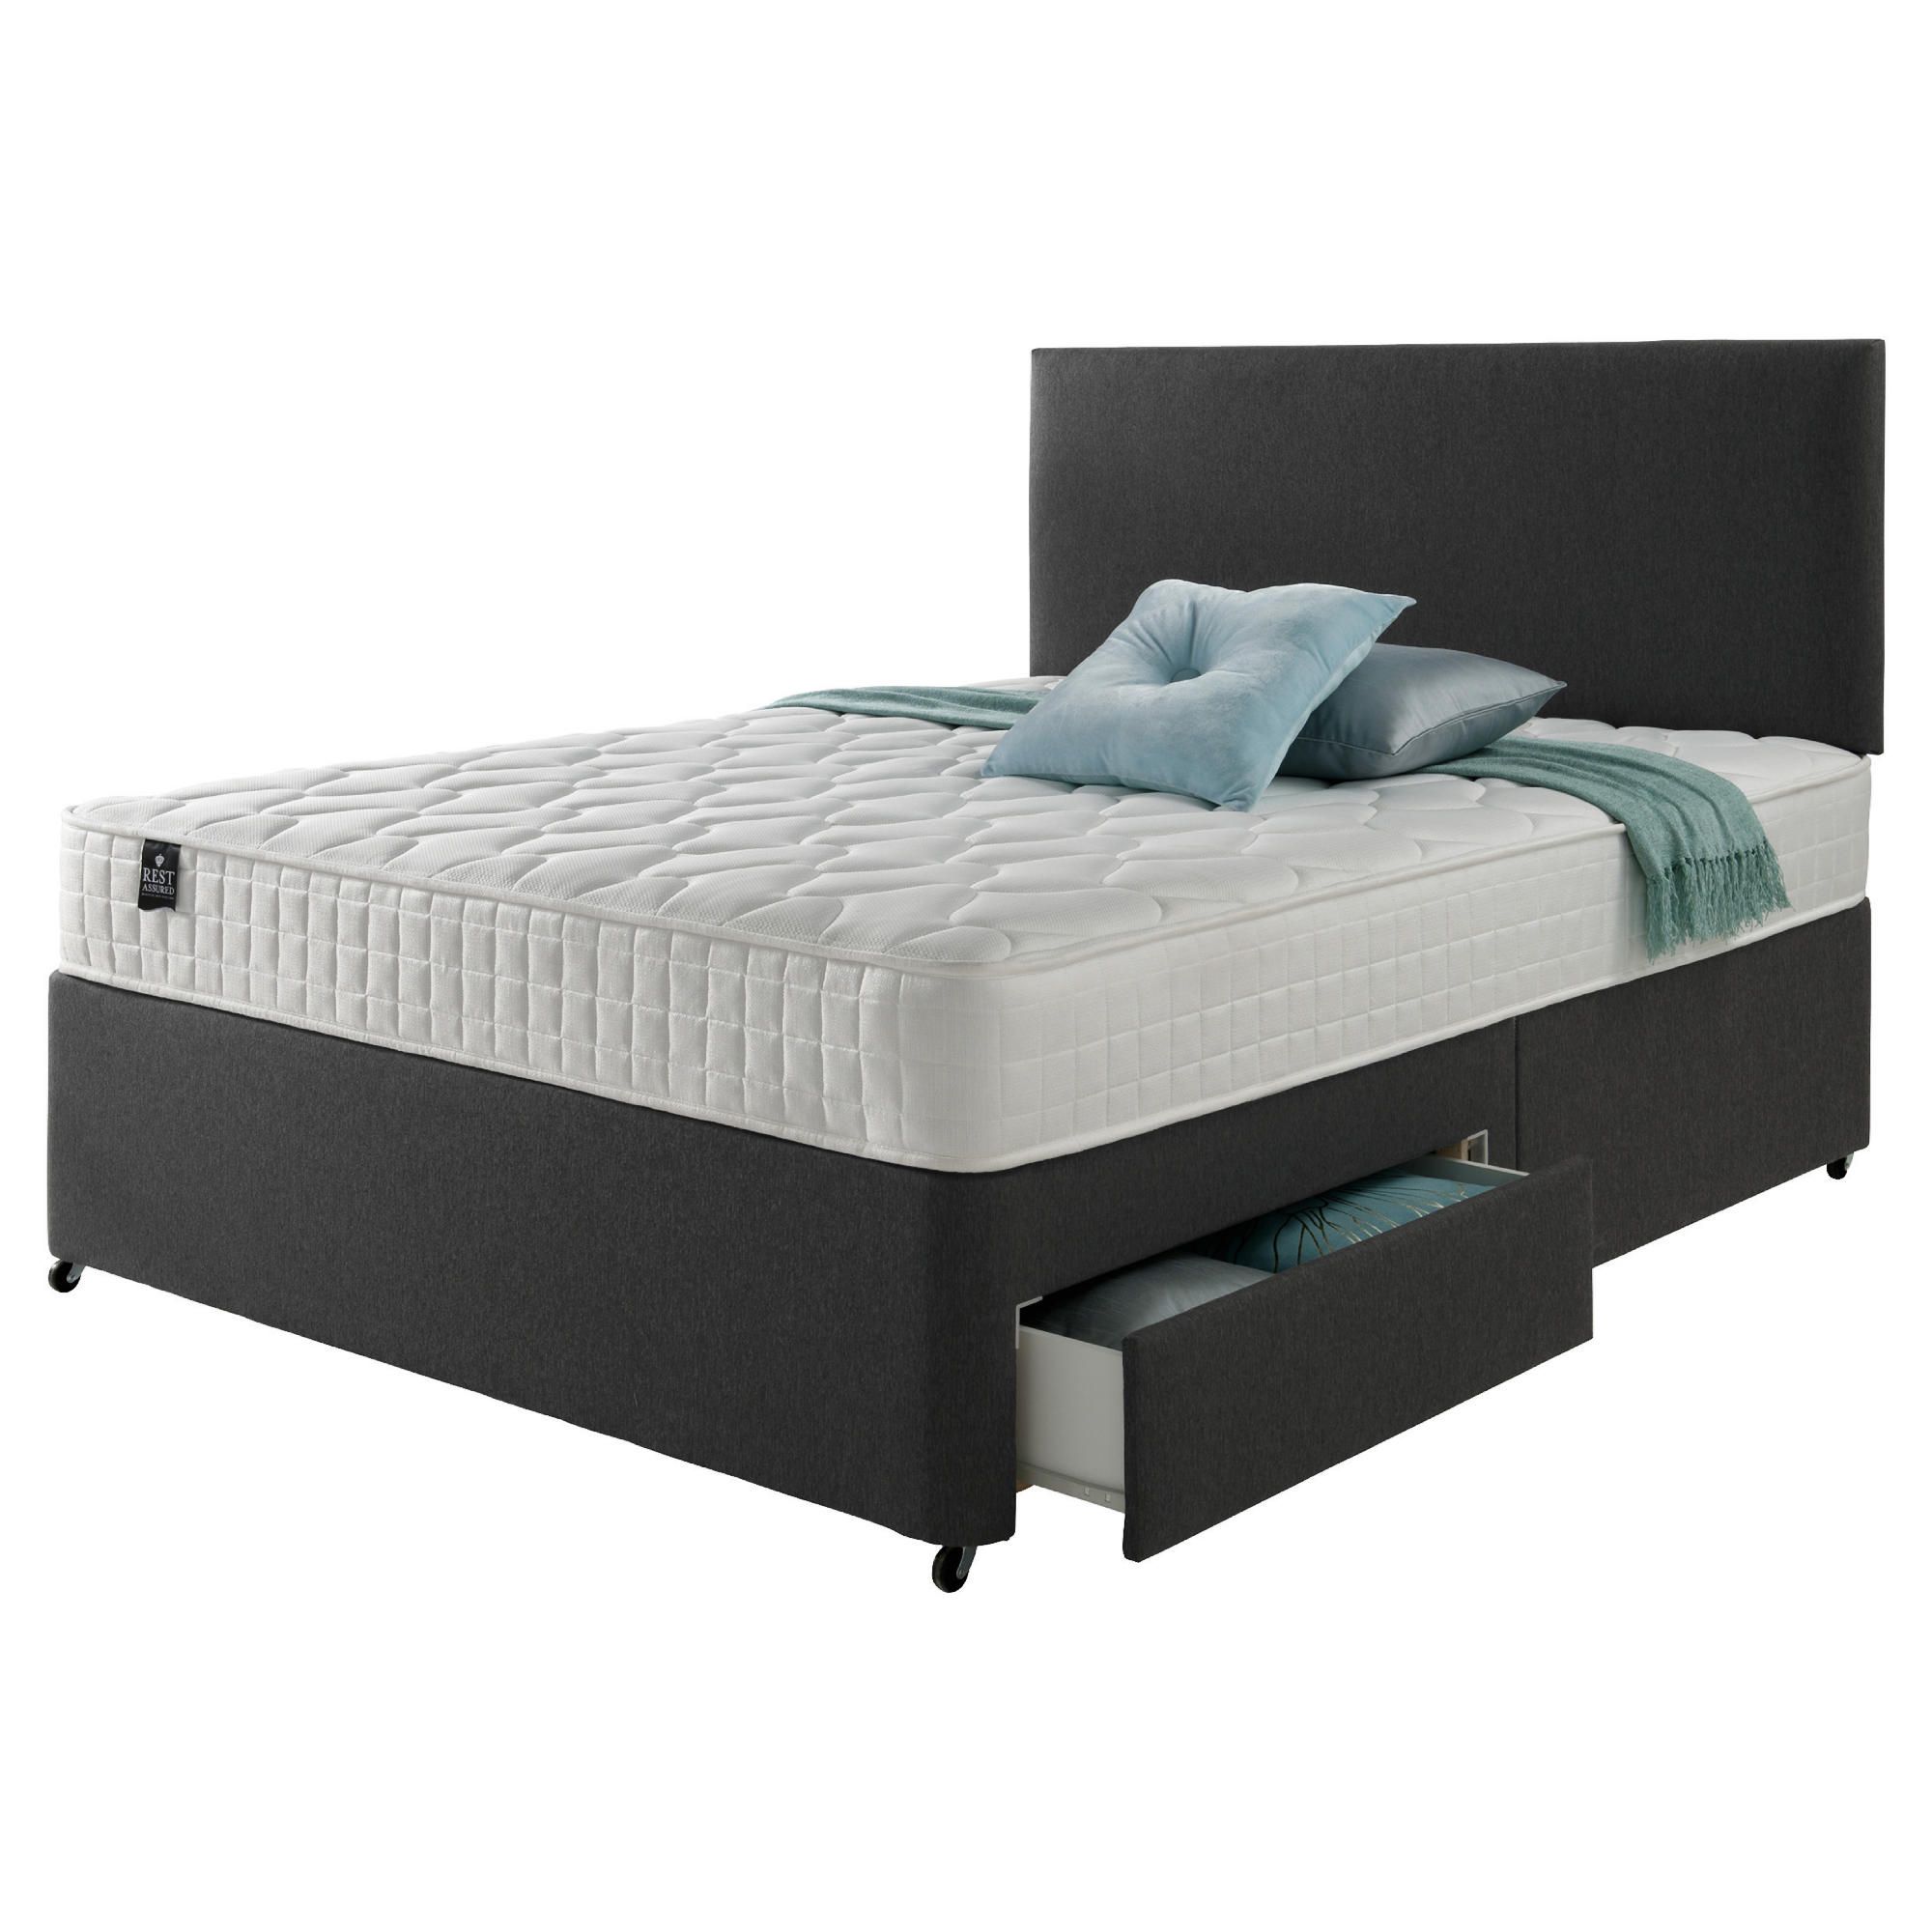 Rest Assured Classic 4 Drawer Super King Divan and Headboard Charcoal at Tesco Direct